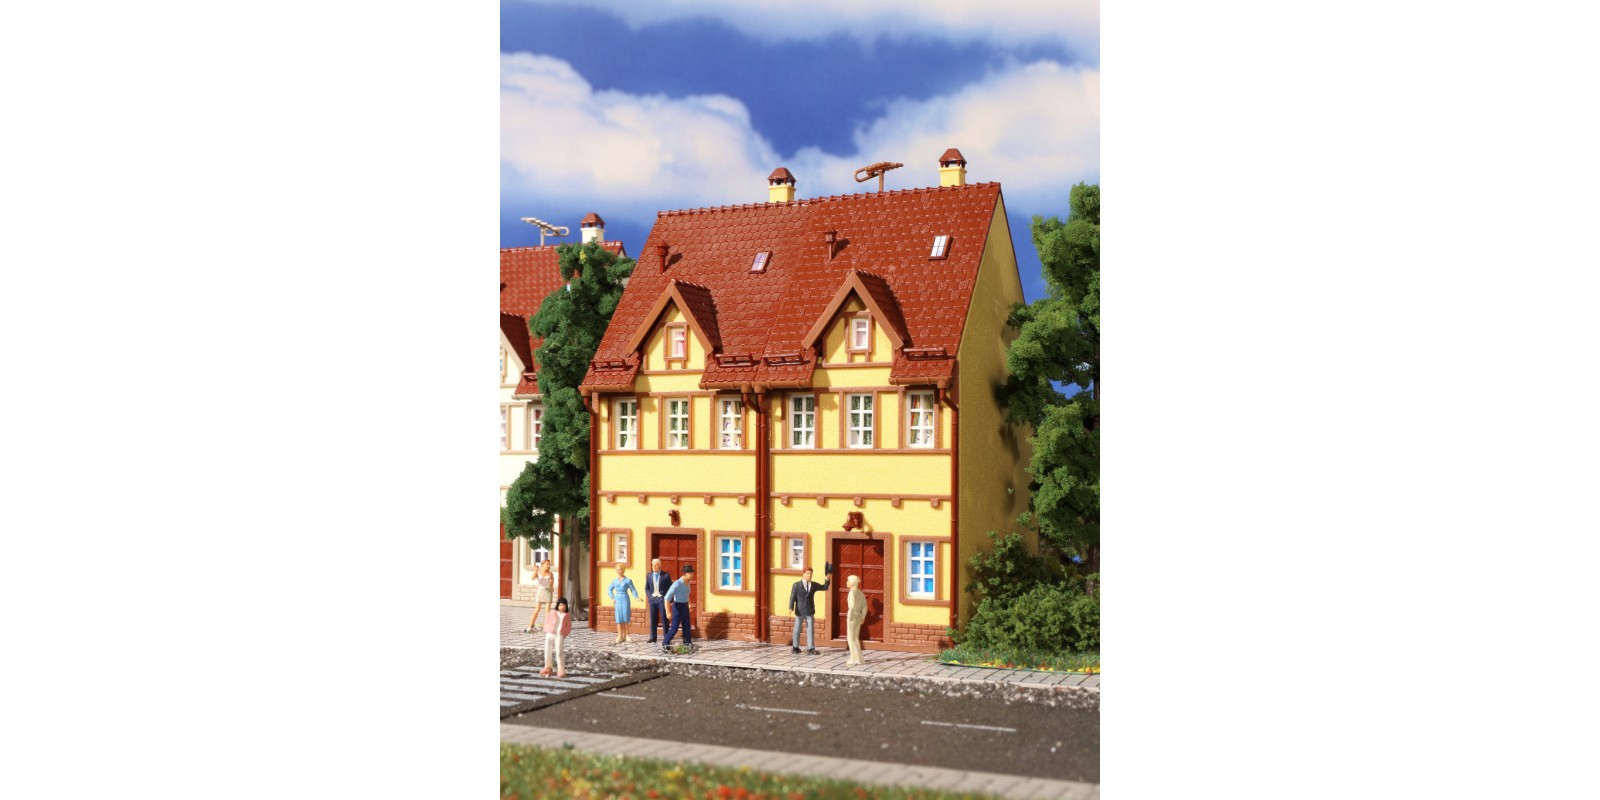 VO43844 H0 Semi-detached row house, yellow